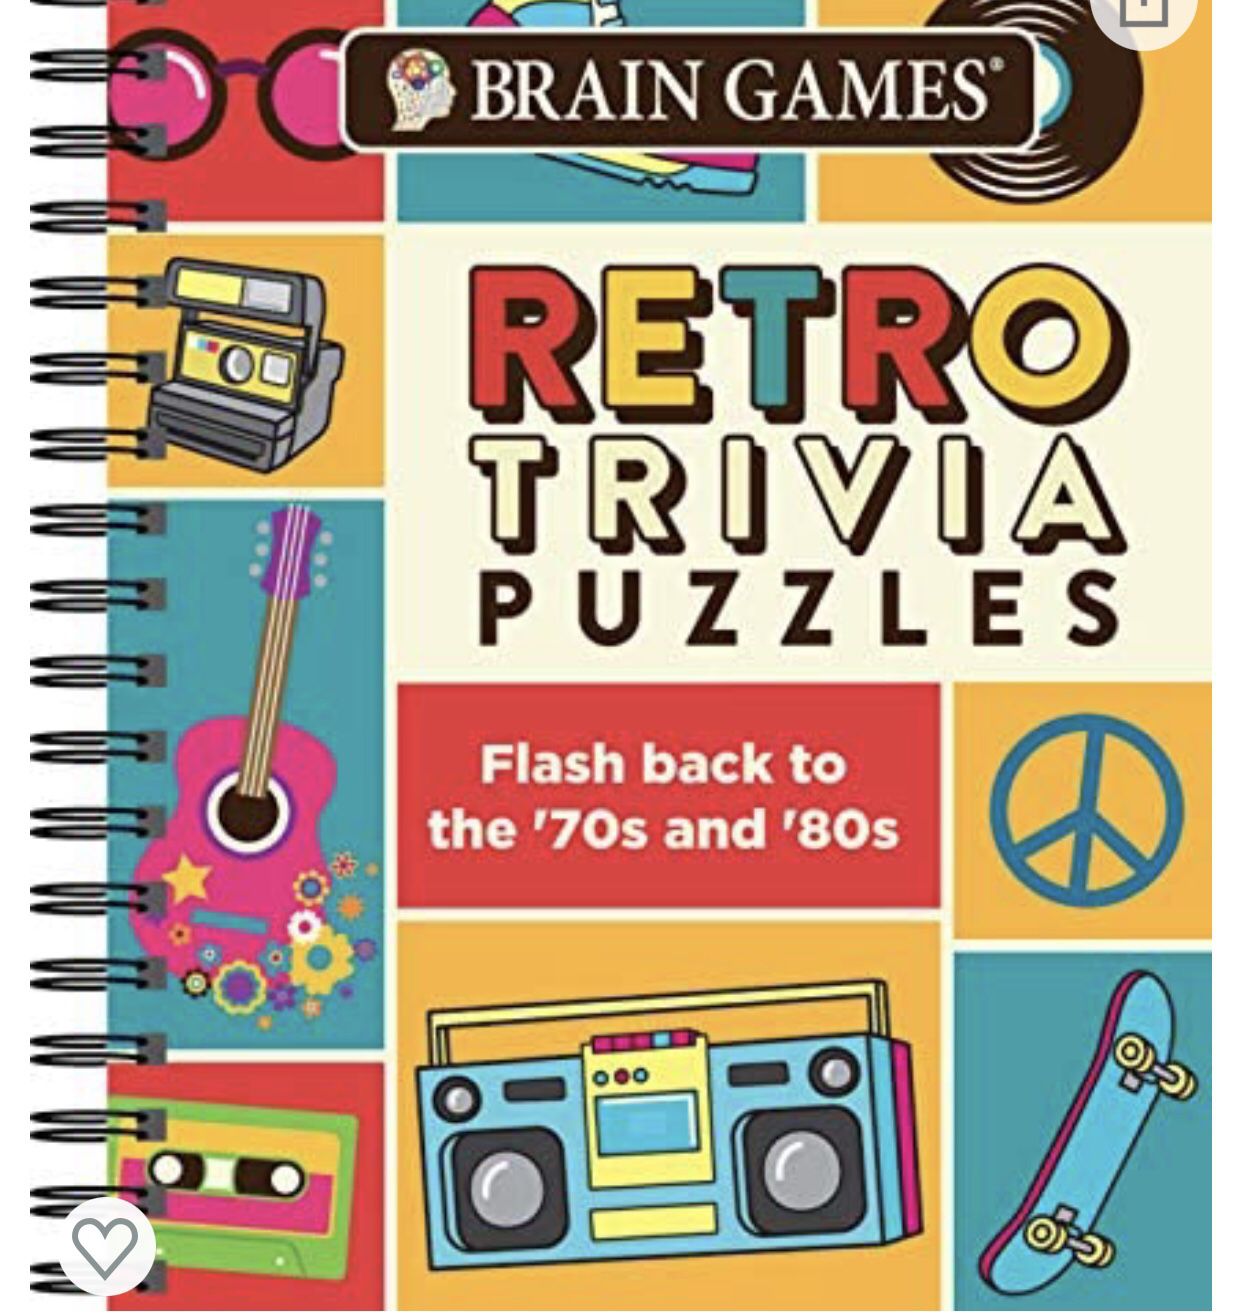 Retro Trivia Puzzles-Brain Games-Flashback to the 70’s & 80’s-New